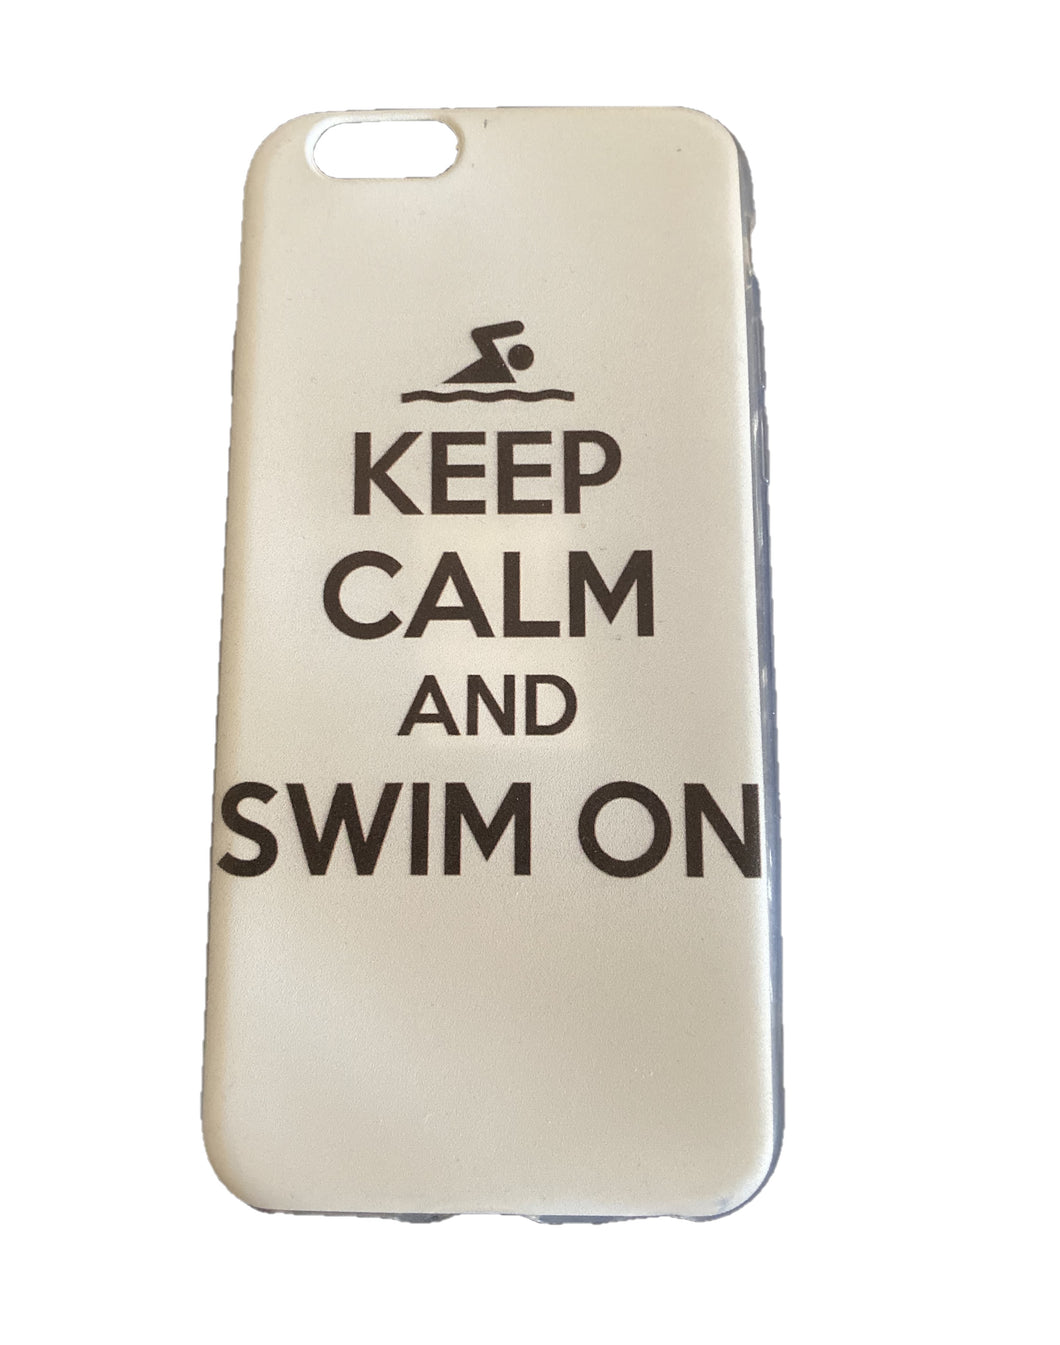 iPhone Cover - Keep Calm and swim on - White